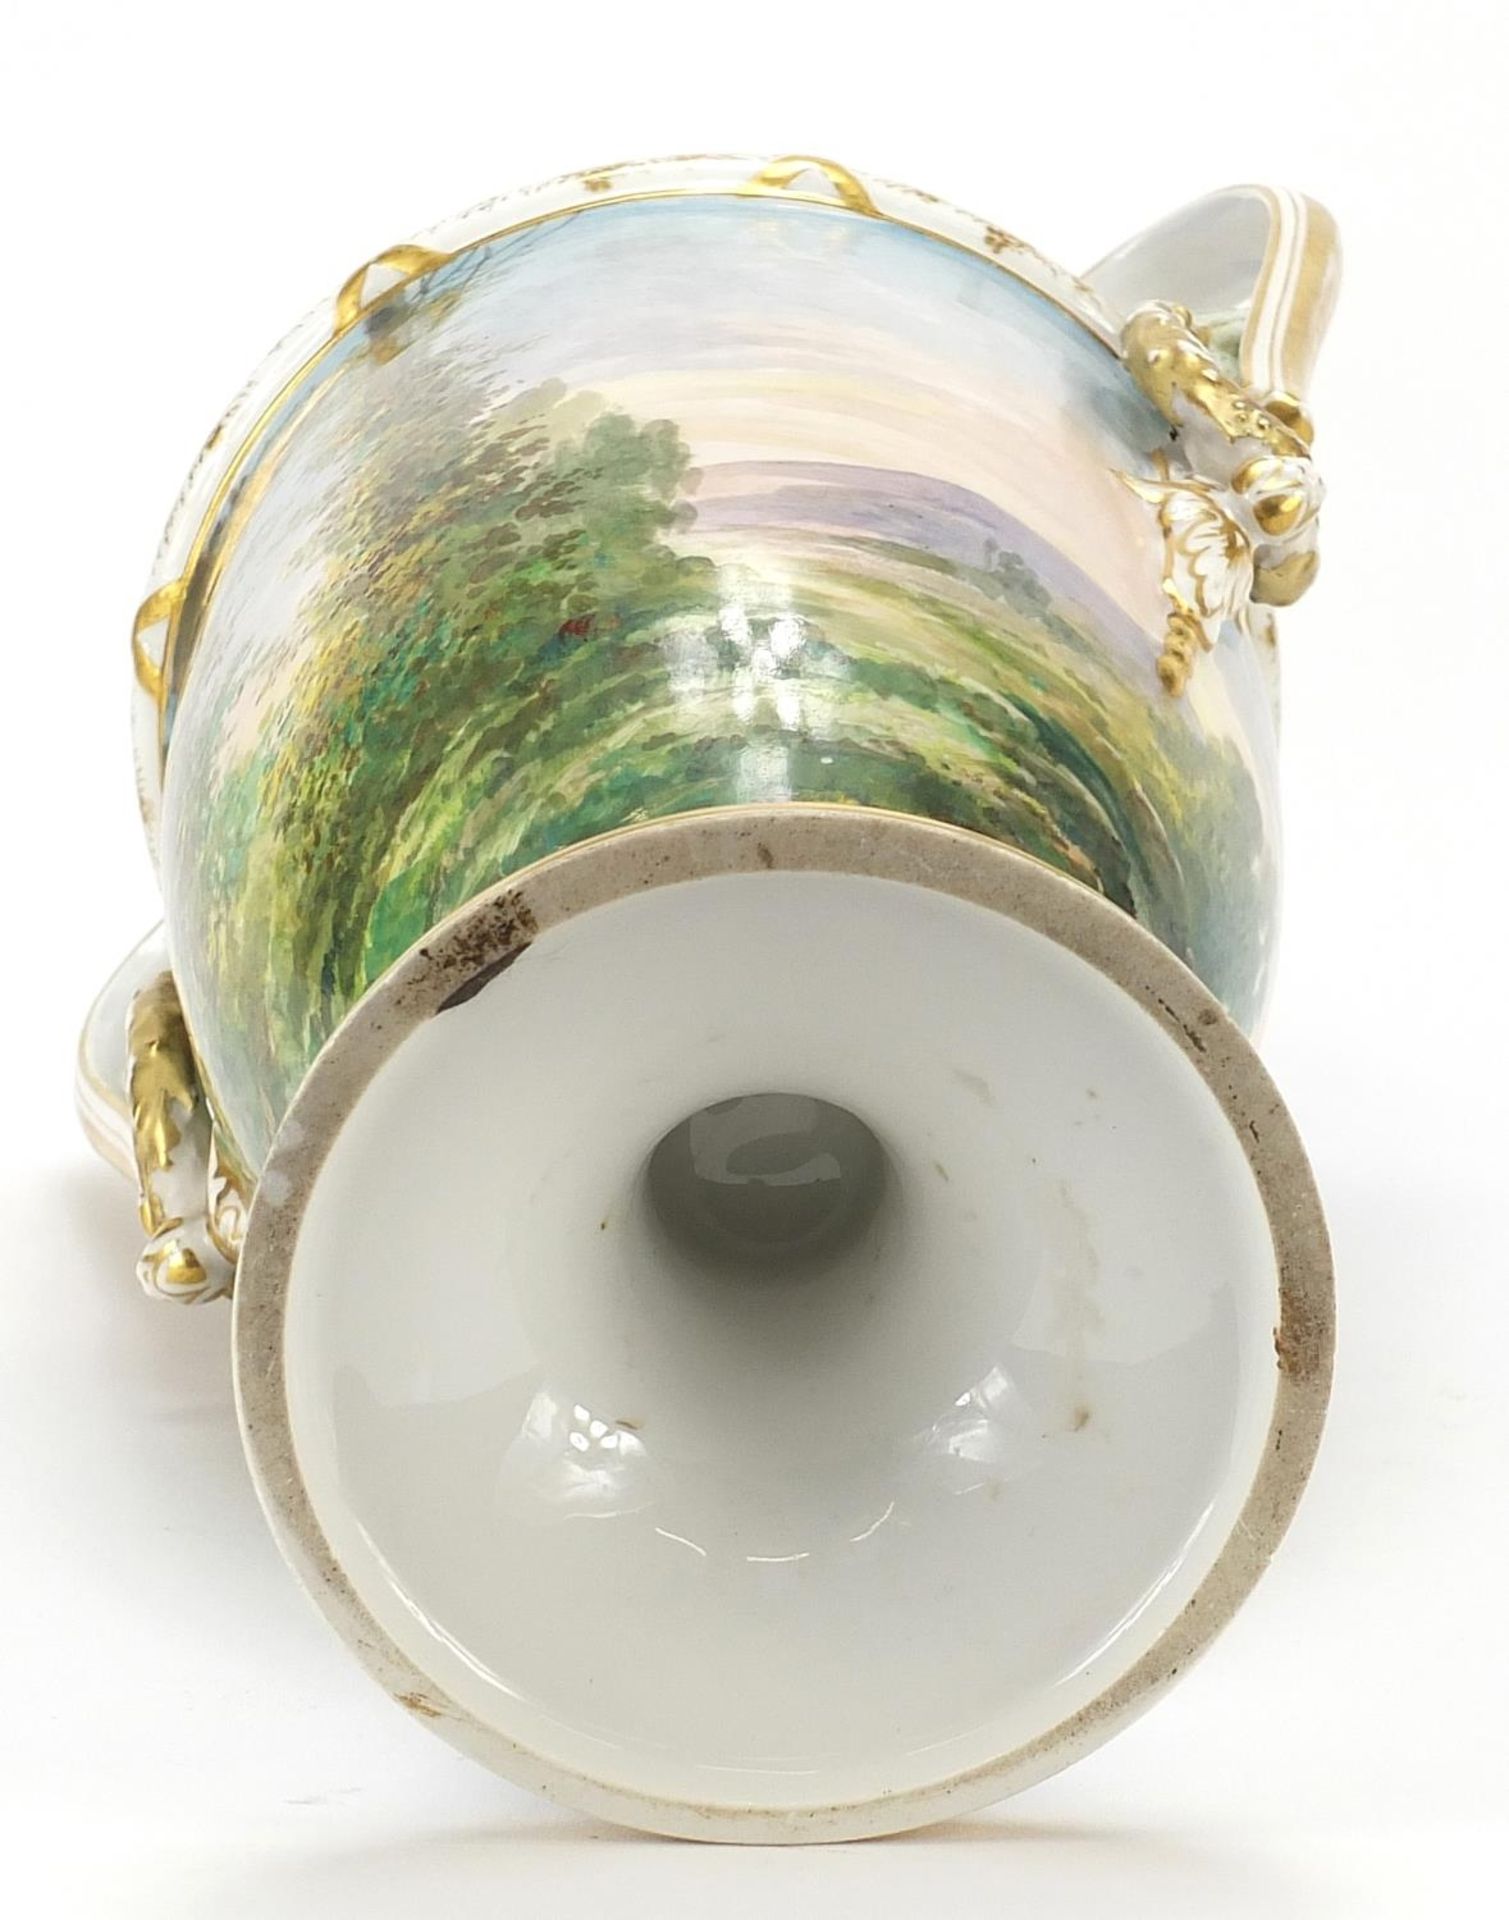 Large 19th century porcelain vase with twin goat head handles, hand painted with a young gypsy - Image 4 of 4